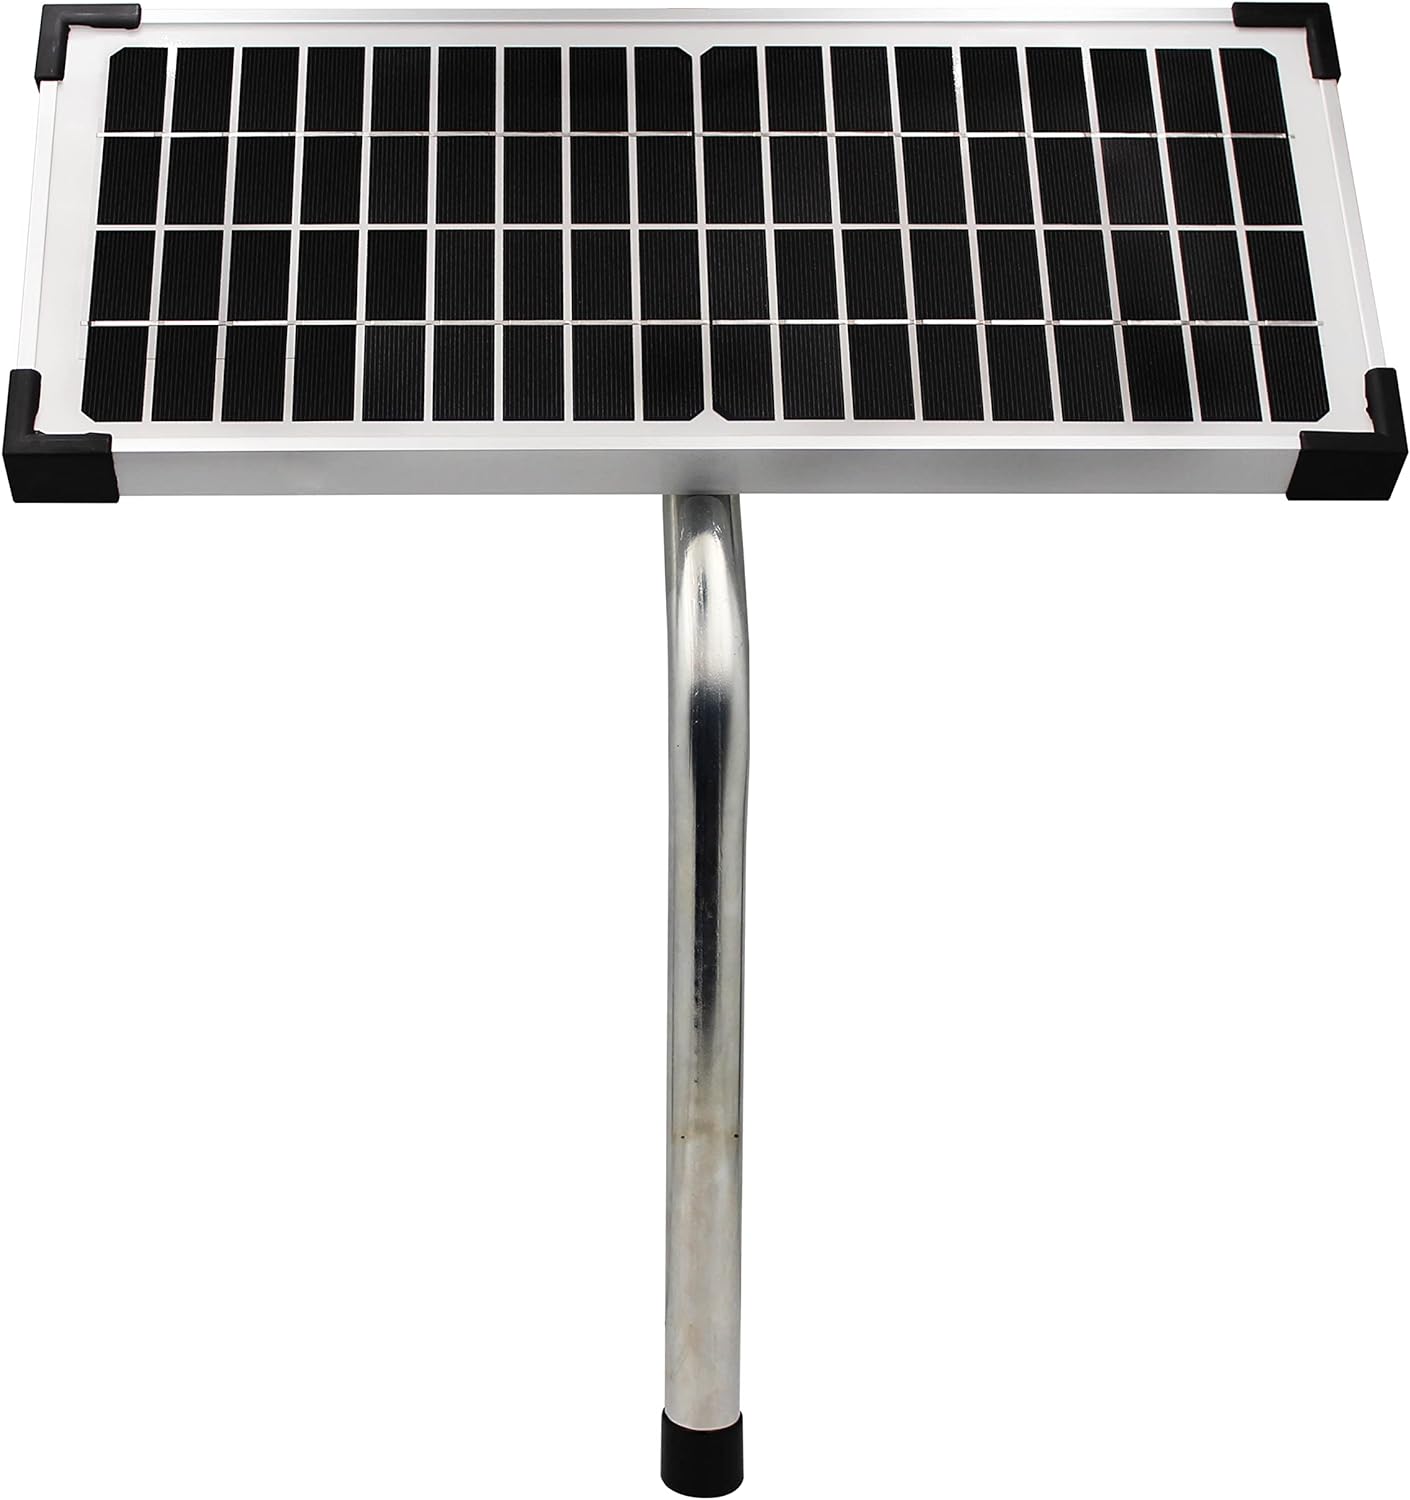 nipponAsia FM123 10 Watt Solar Panel Kit, Compatible with Mighty Mule Automatic Gate Openers